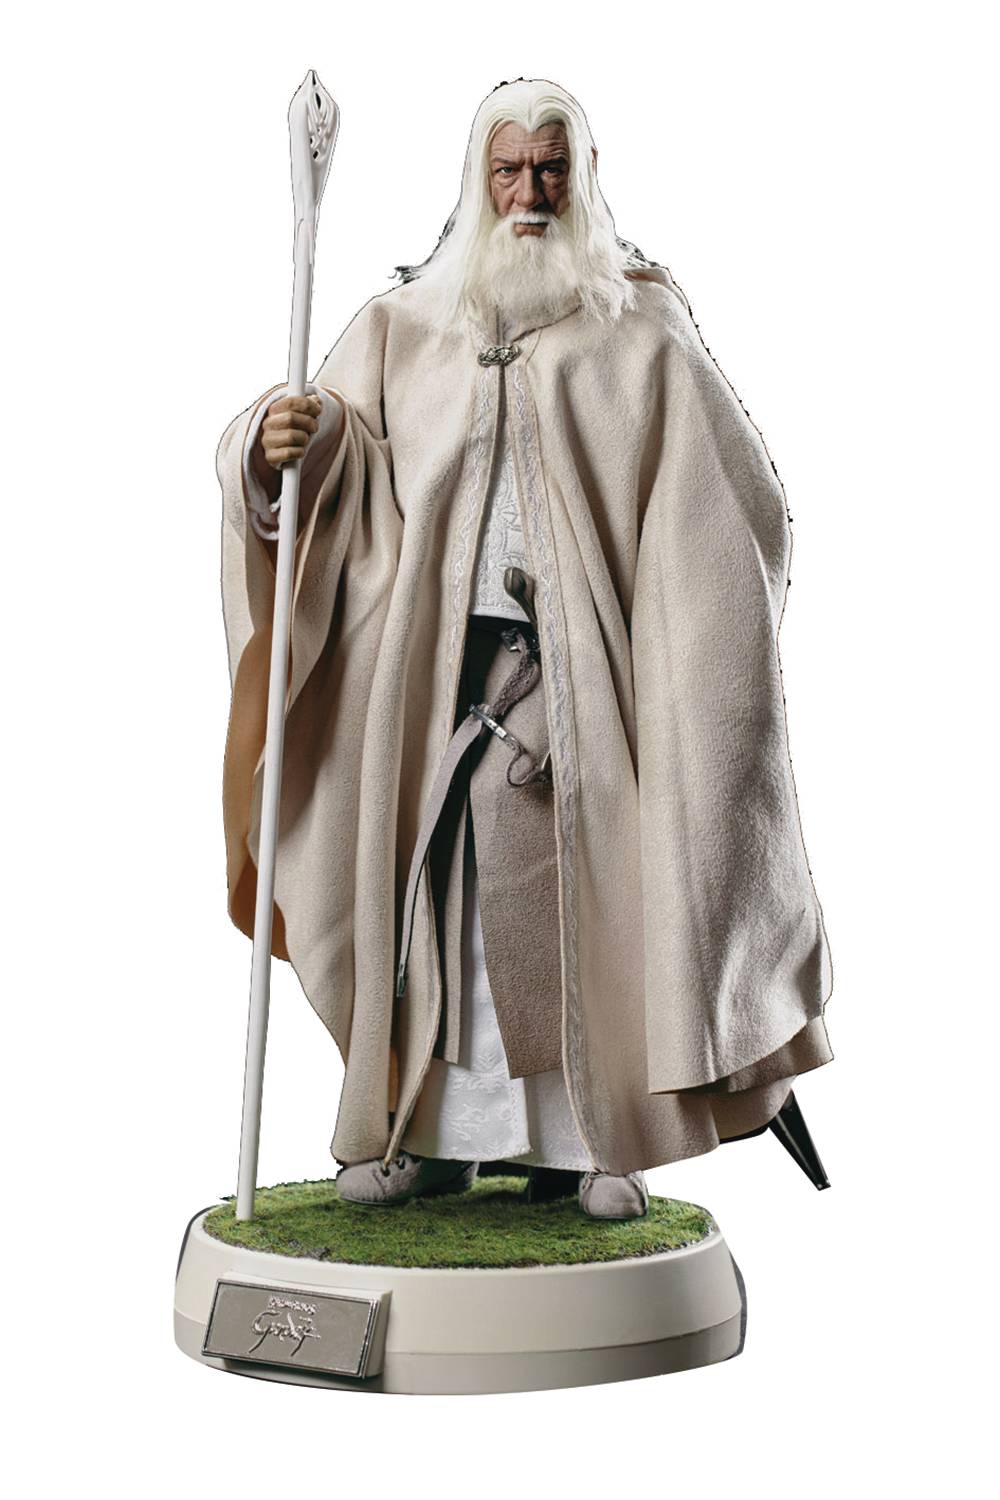 Lord Of The Rings Crown Series Gandalf The White with Shadowfax Horse Polystone Action Figure